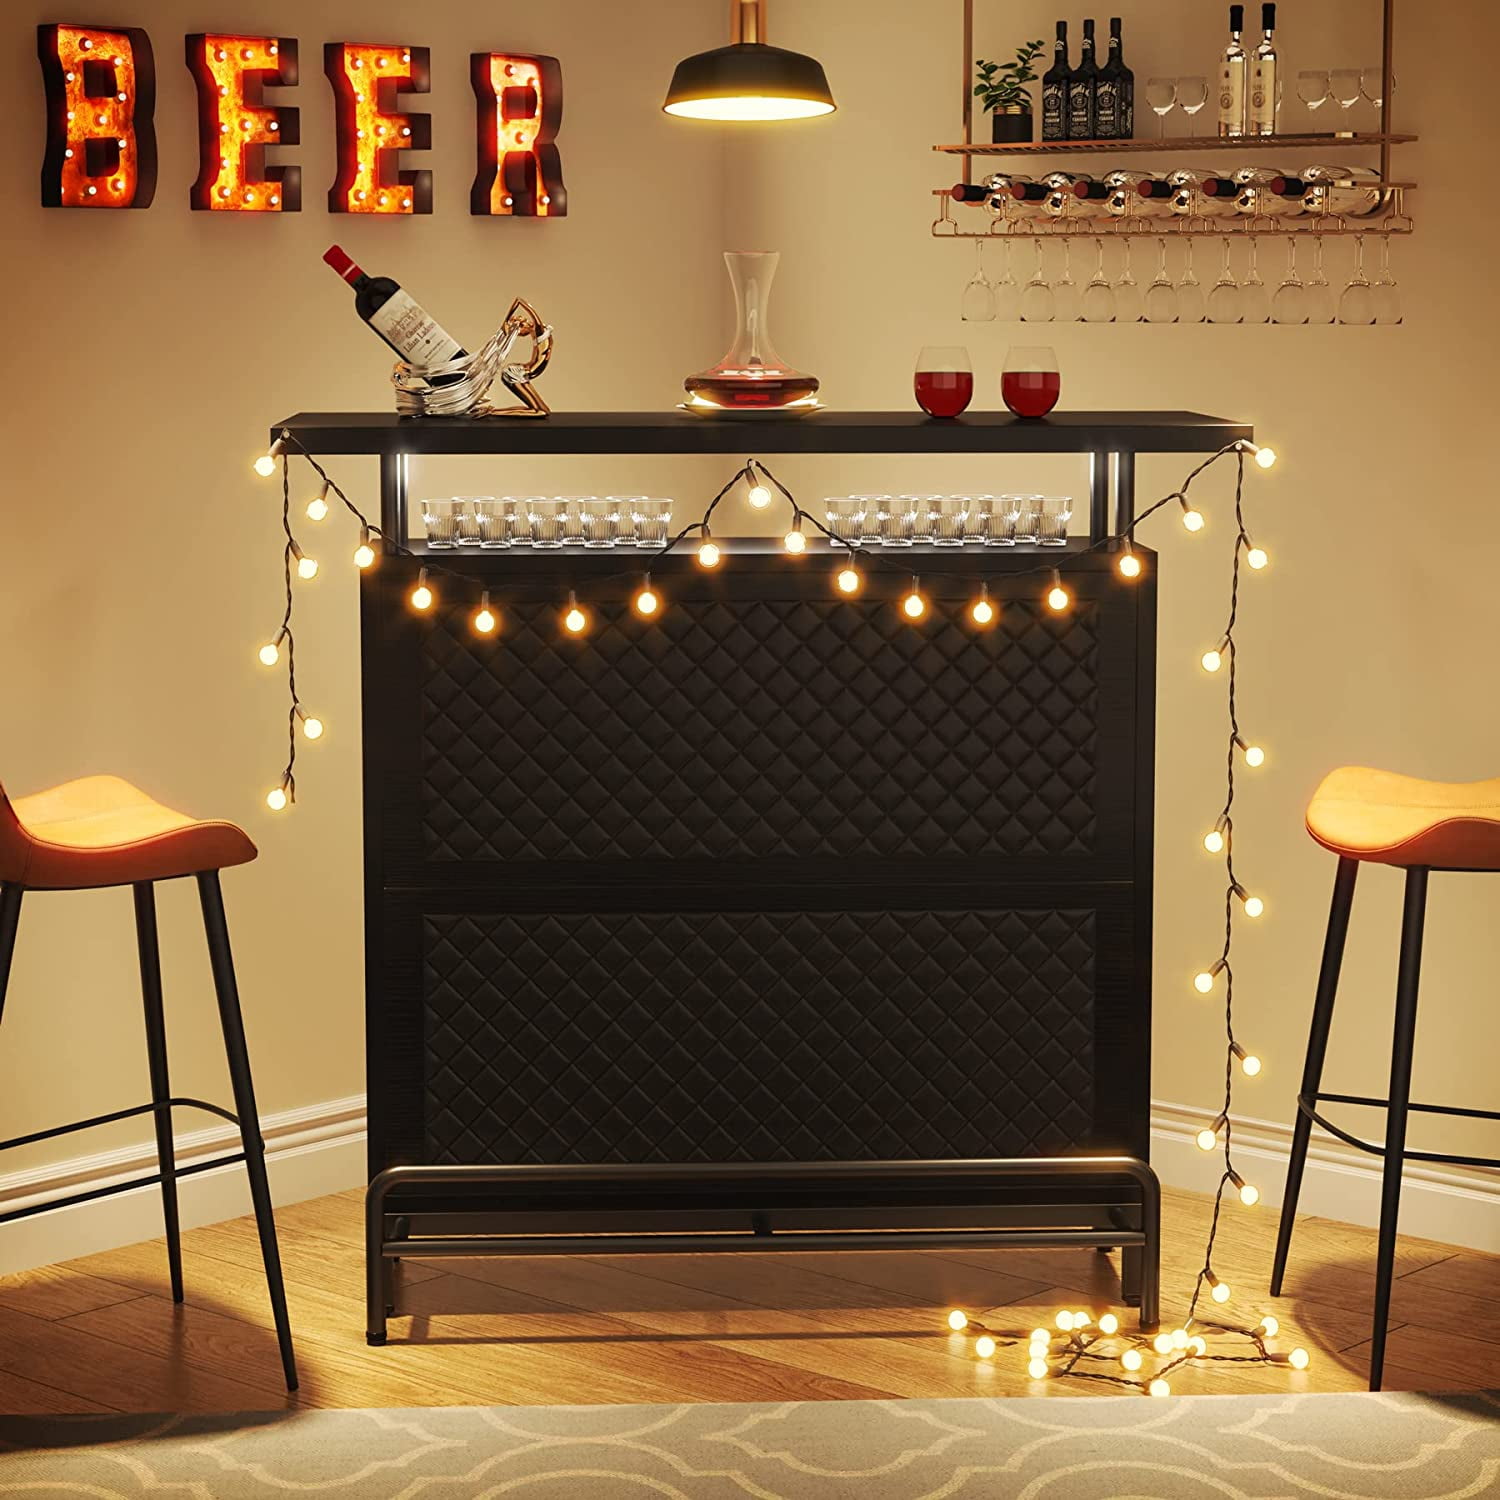 41 Bar Gifts for the Dude With a Home Bar​ 2021